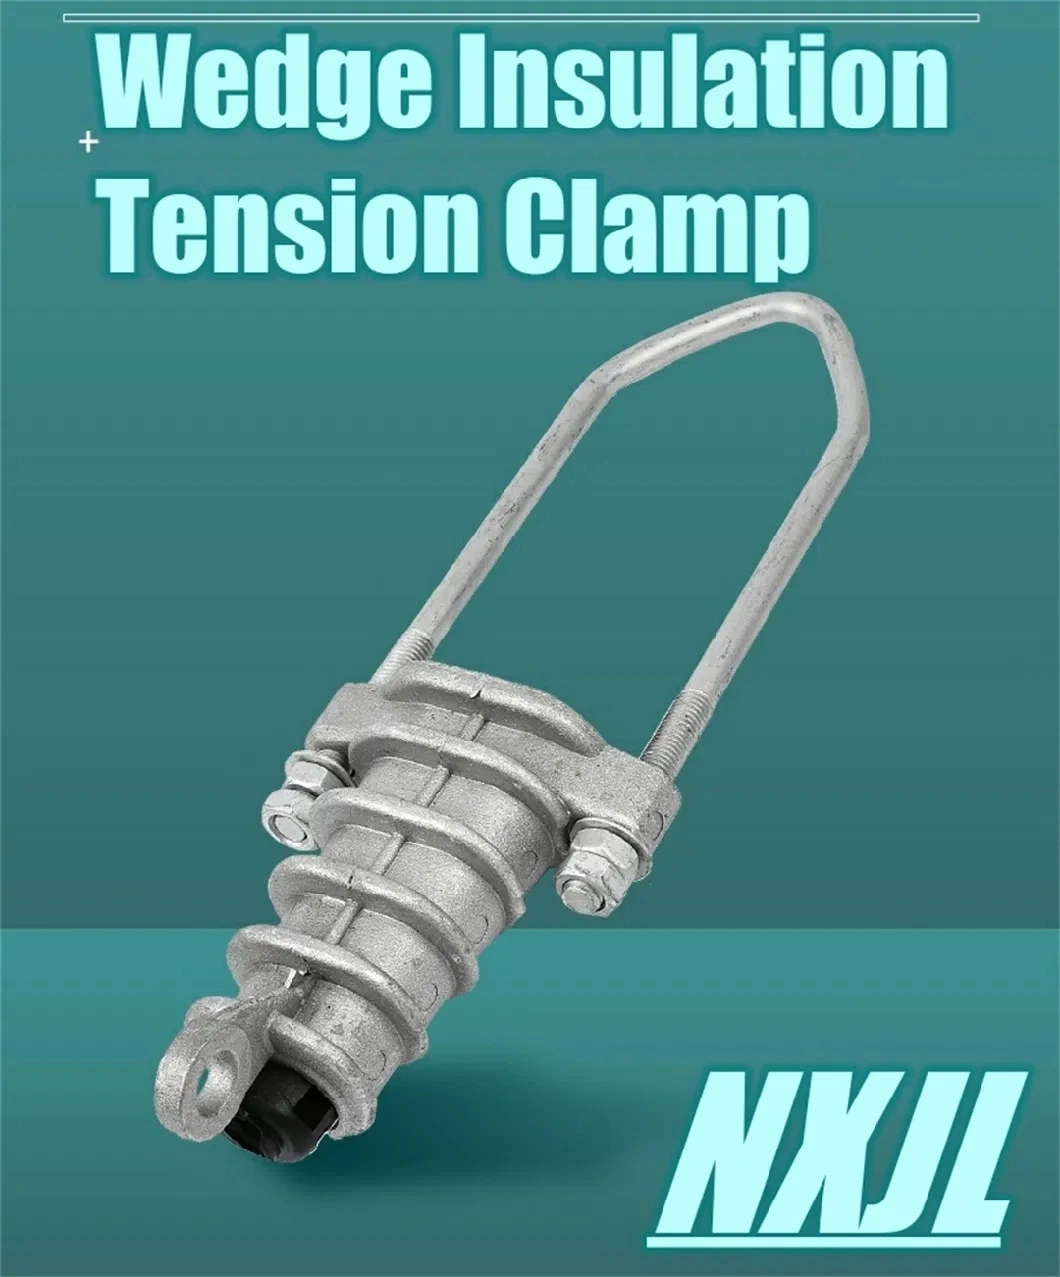 Nxjl Wedge Insulated Tension Clamp to Fix Tighten 10kv Overhead Insulated Wire